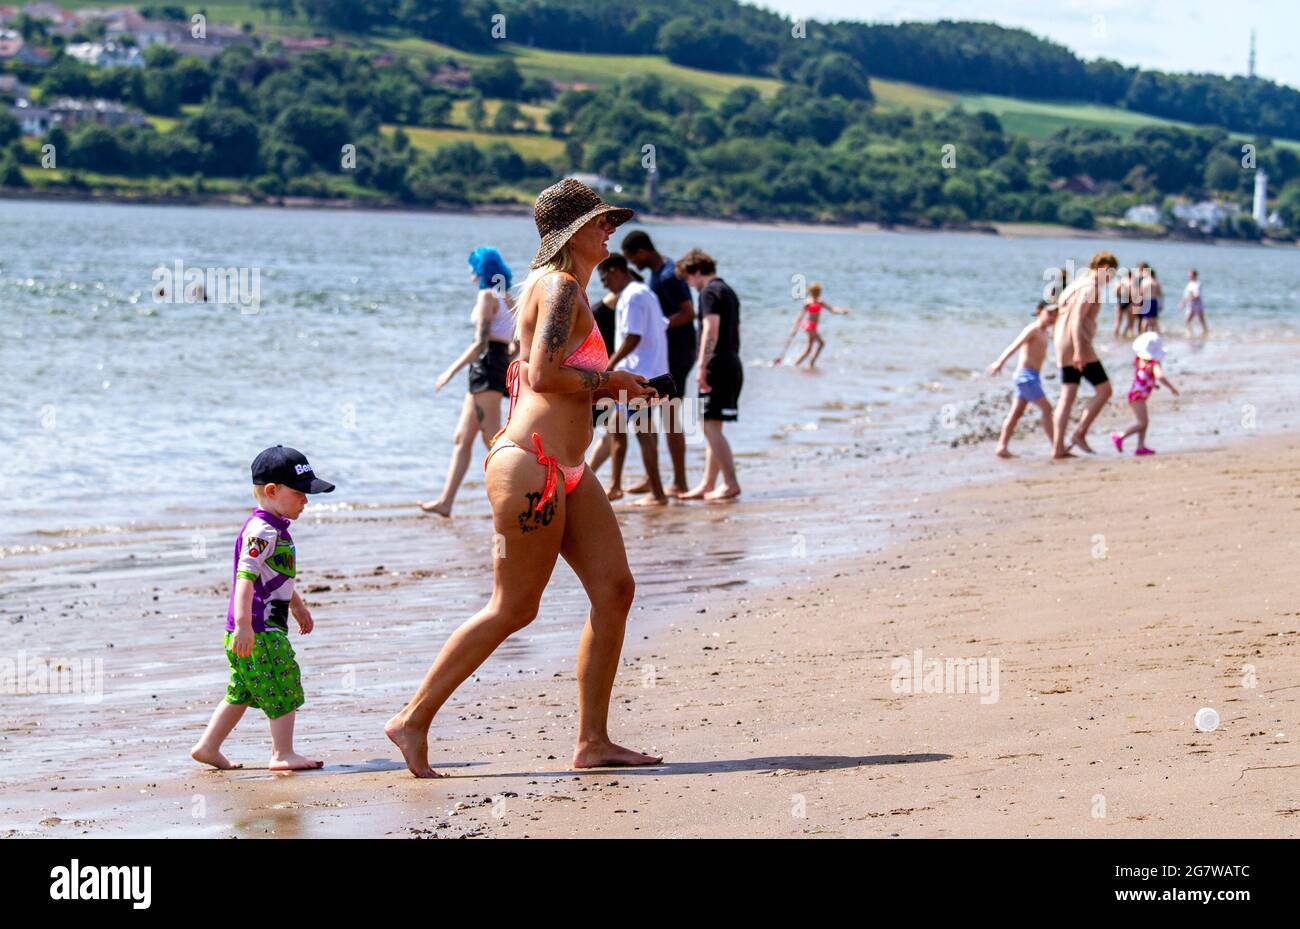 Dundee, Tayside, Scotland, UK. 16th July, 2021. UK Weather: Hot sunny weather sweeping across North East Scotland with maximum temperature 29°C. Beach-goers take the day out soaking up the warm glorious summer sunshine along Broughty Ferry beach in Dundee. A mother and her son playing about in the river Tay. Credit: Dundee Photographics/Alamy Live News Stock Photo